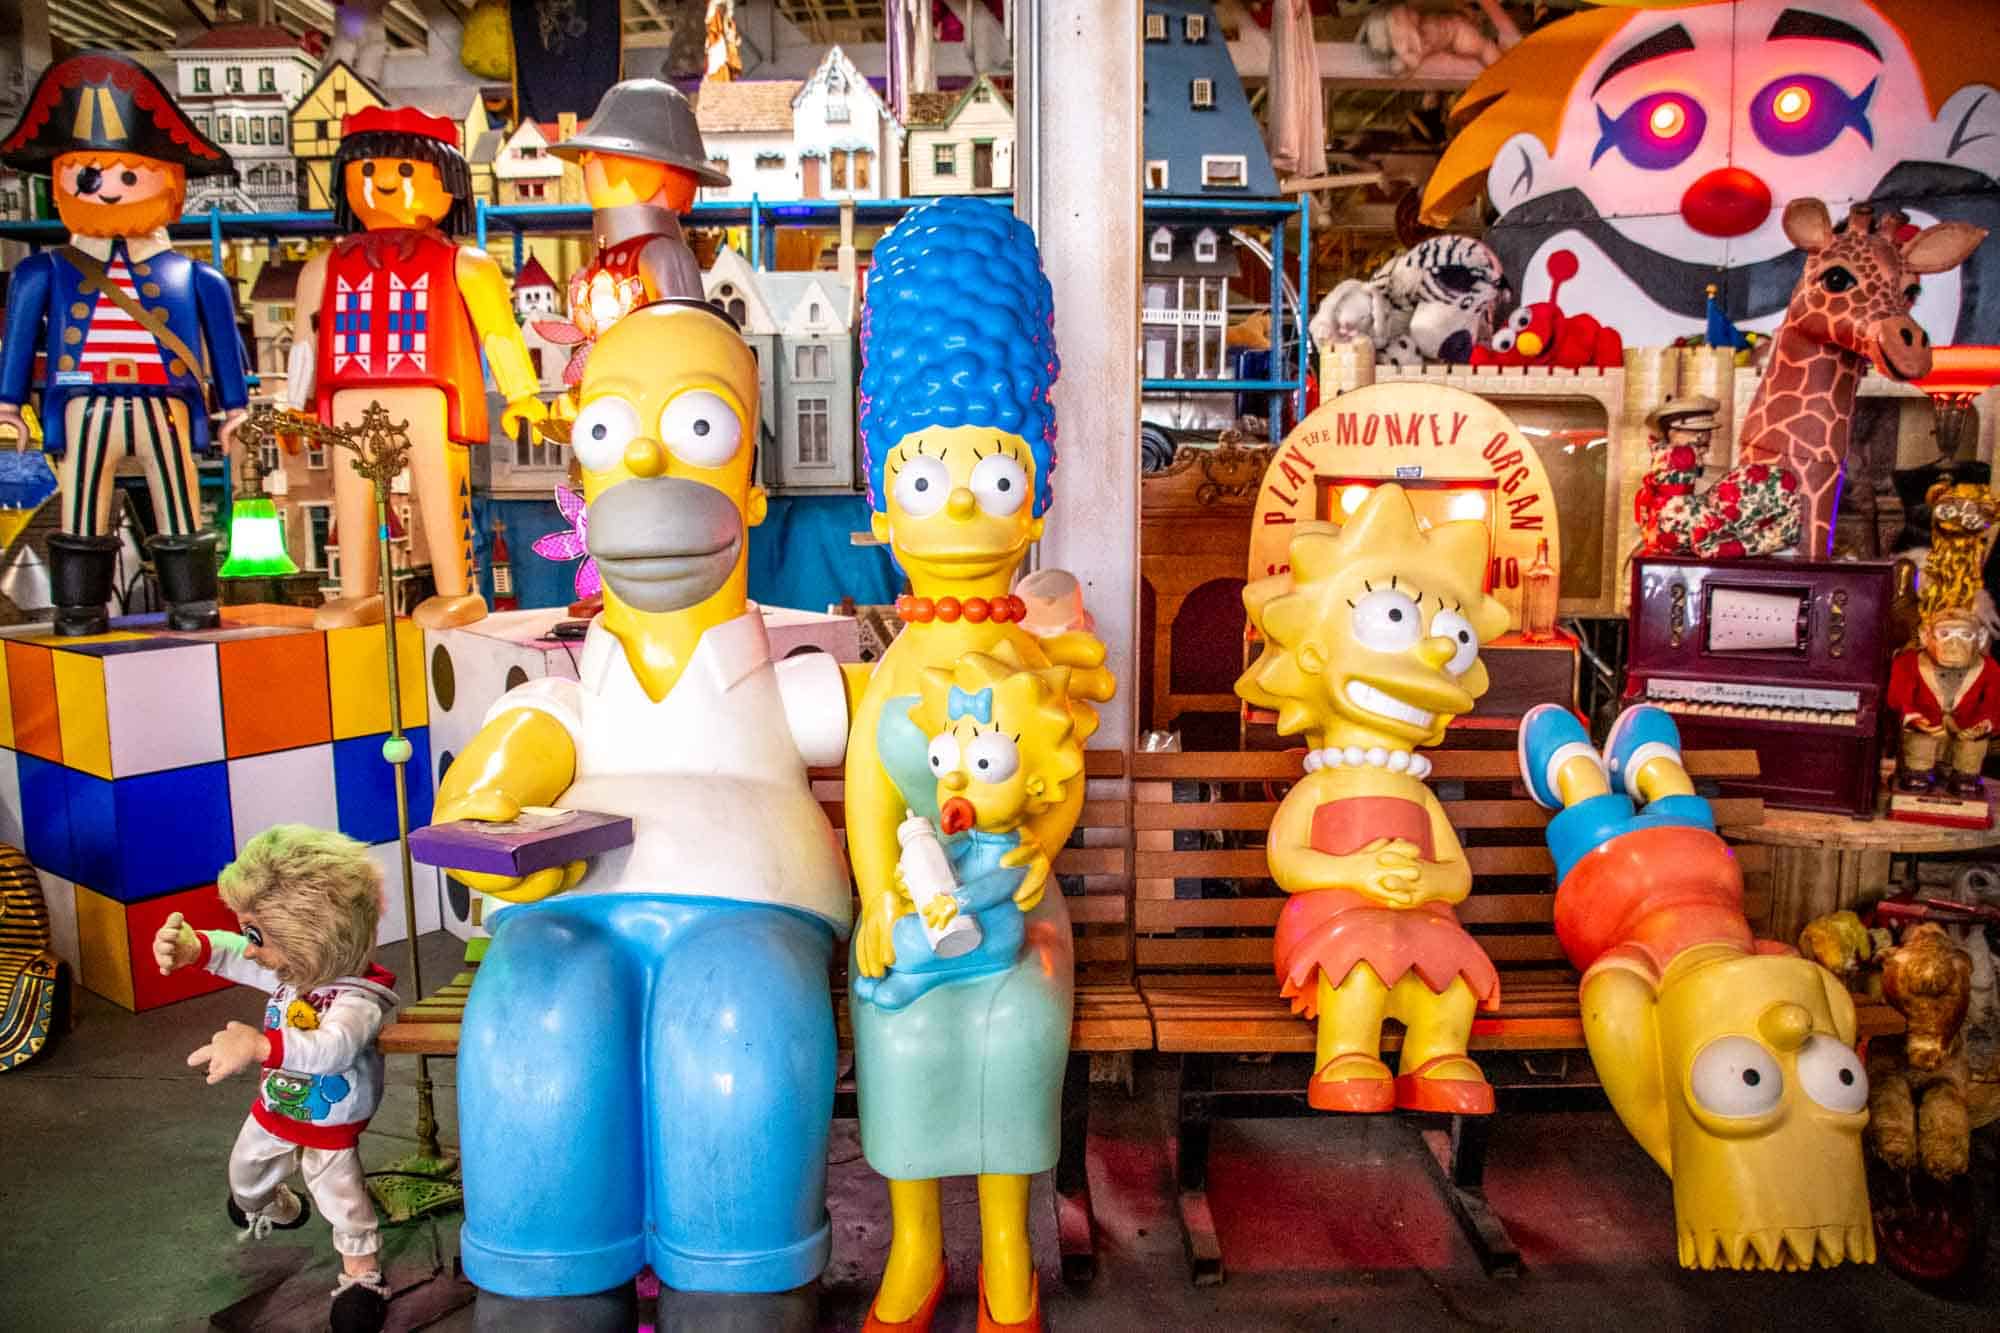 Life-sized Simpsons characters sitting on a bench beside giant Legos characters